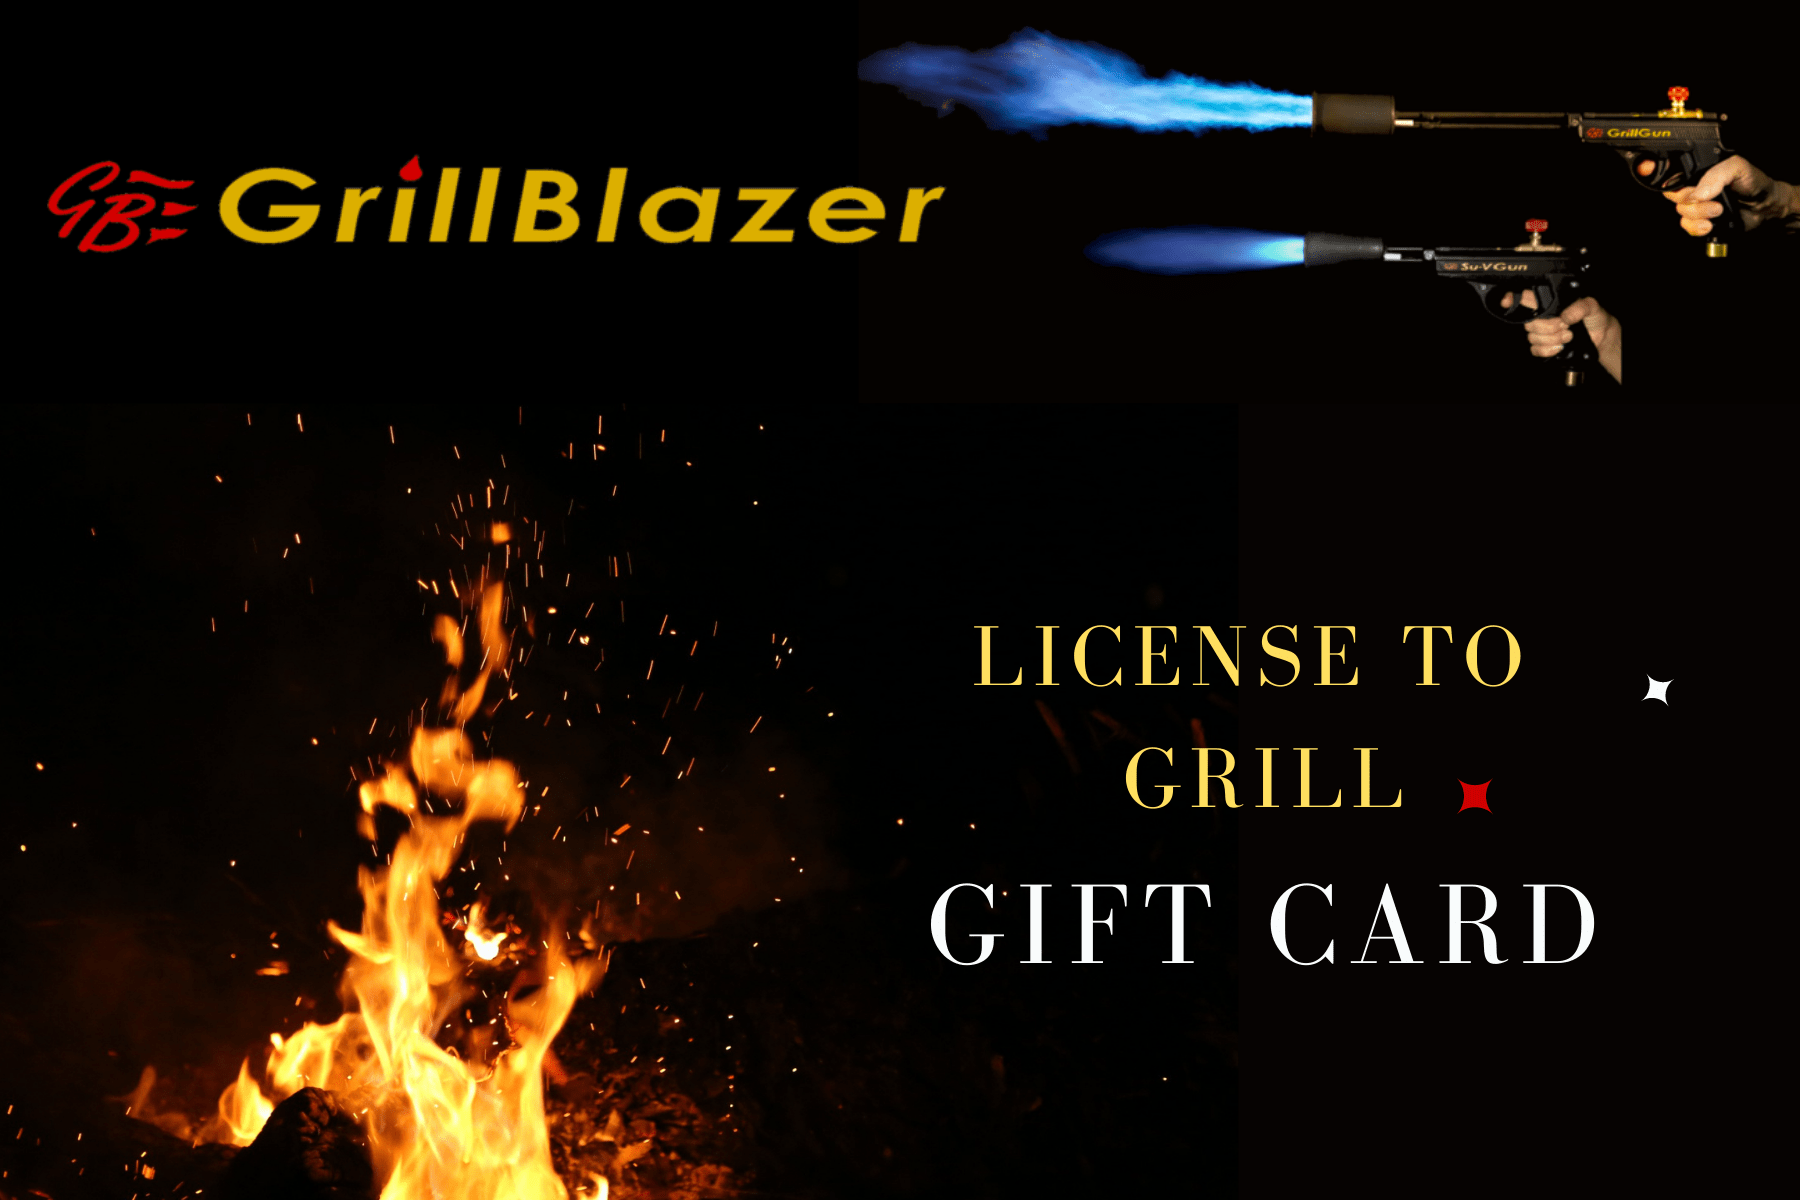 Gift Card - License To Grill